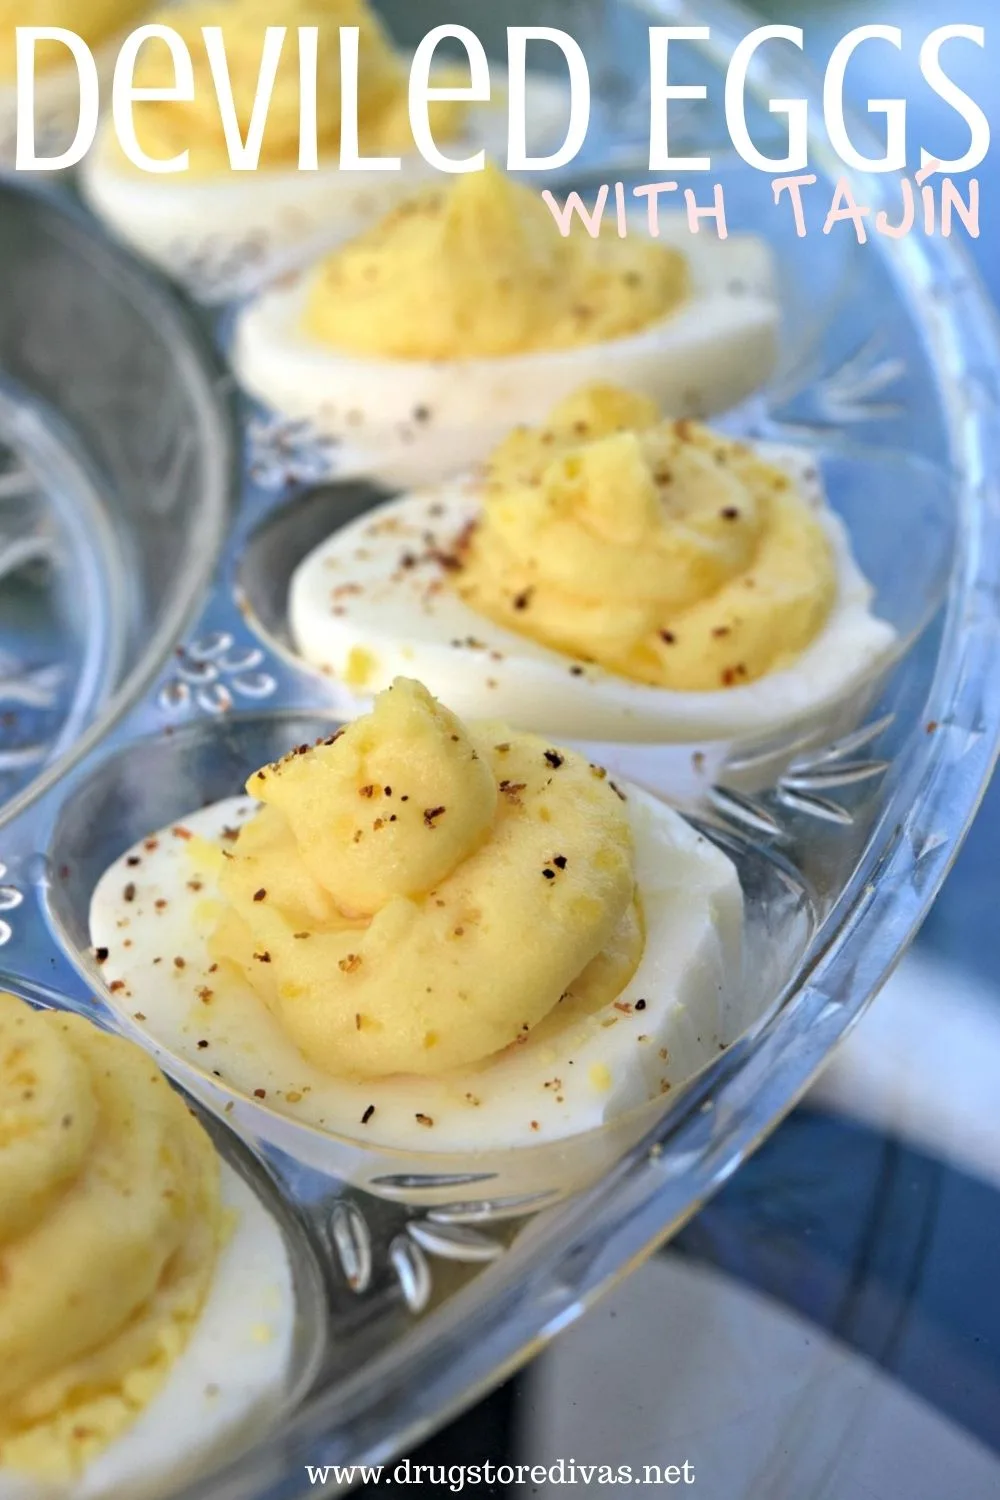 Five Deviled Eggs on a tray.